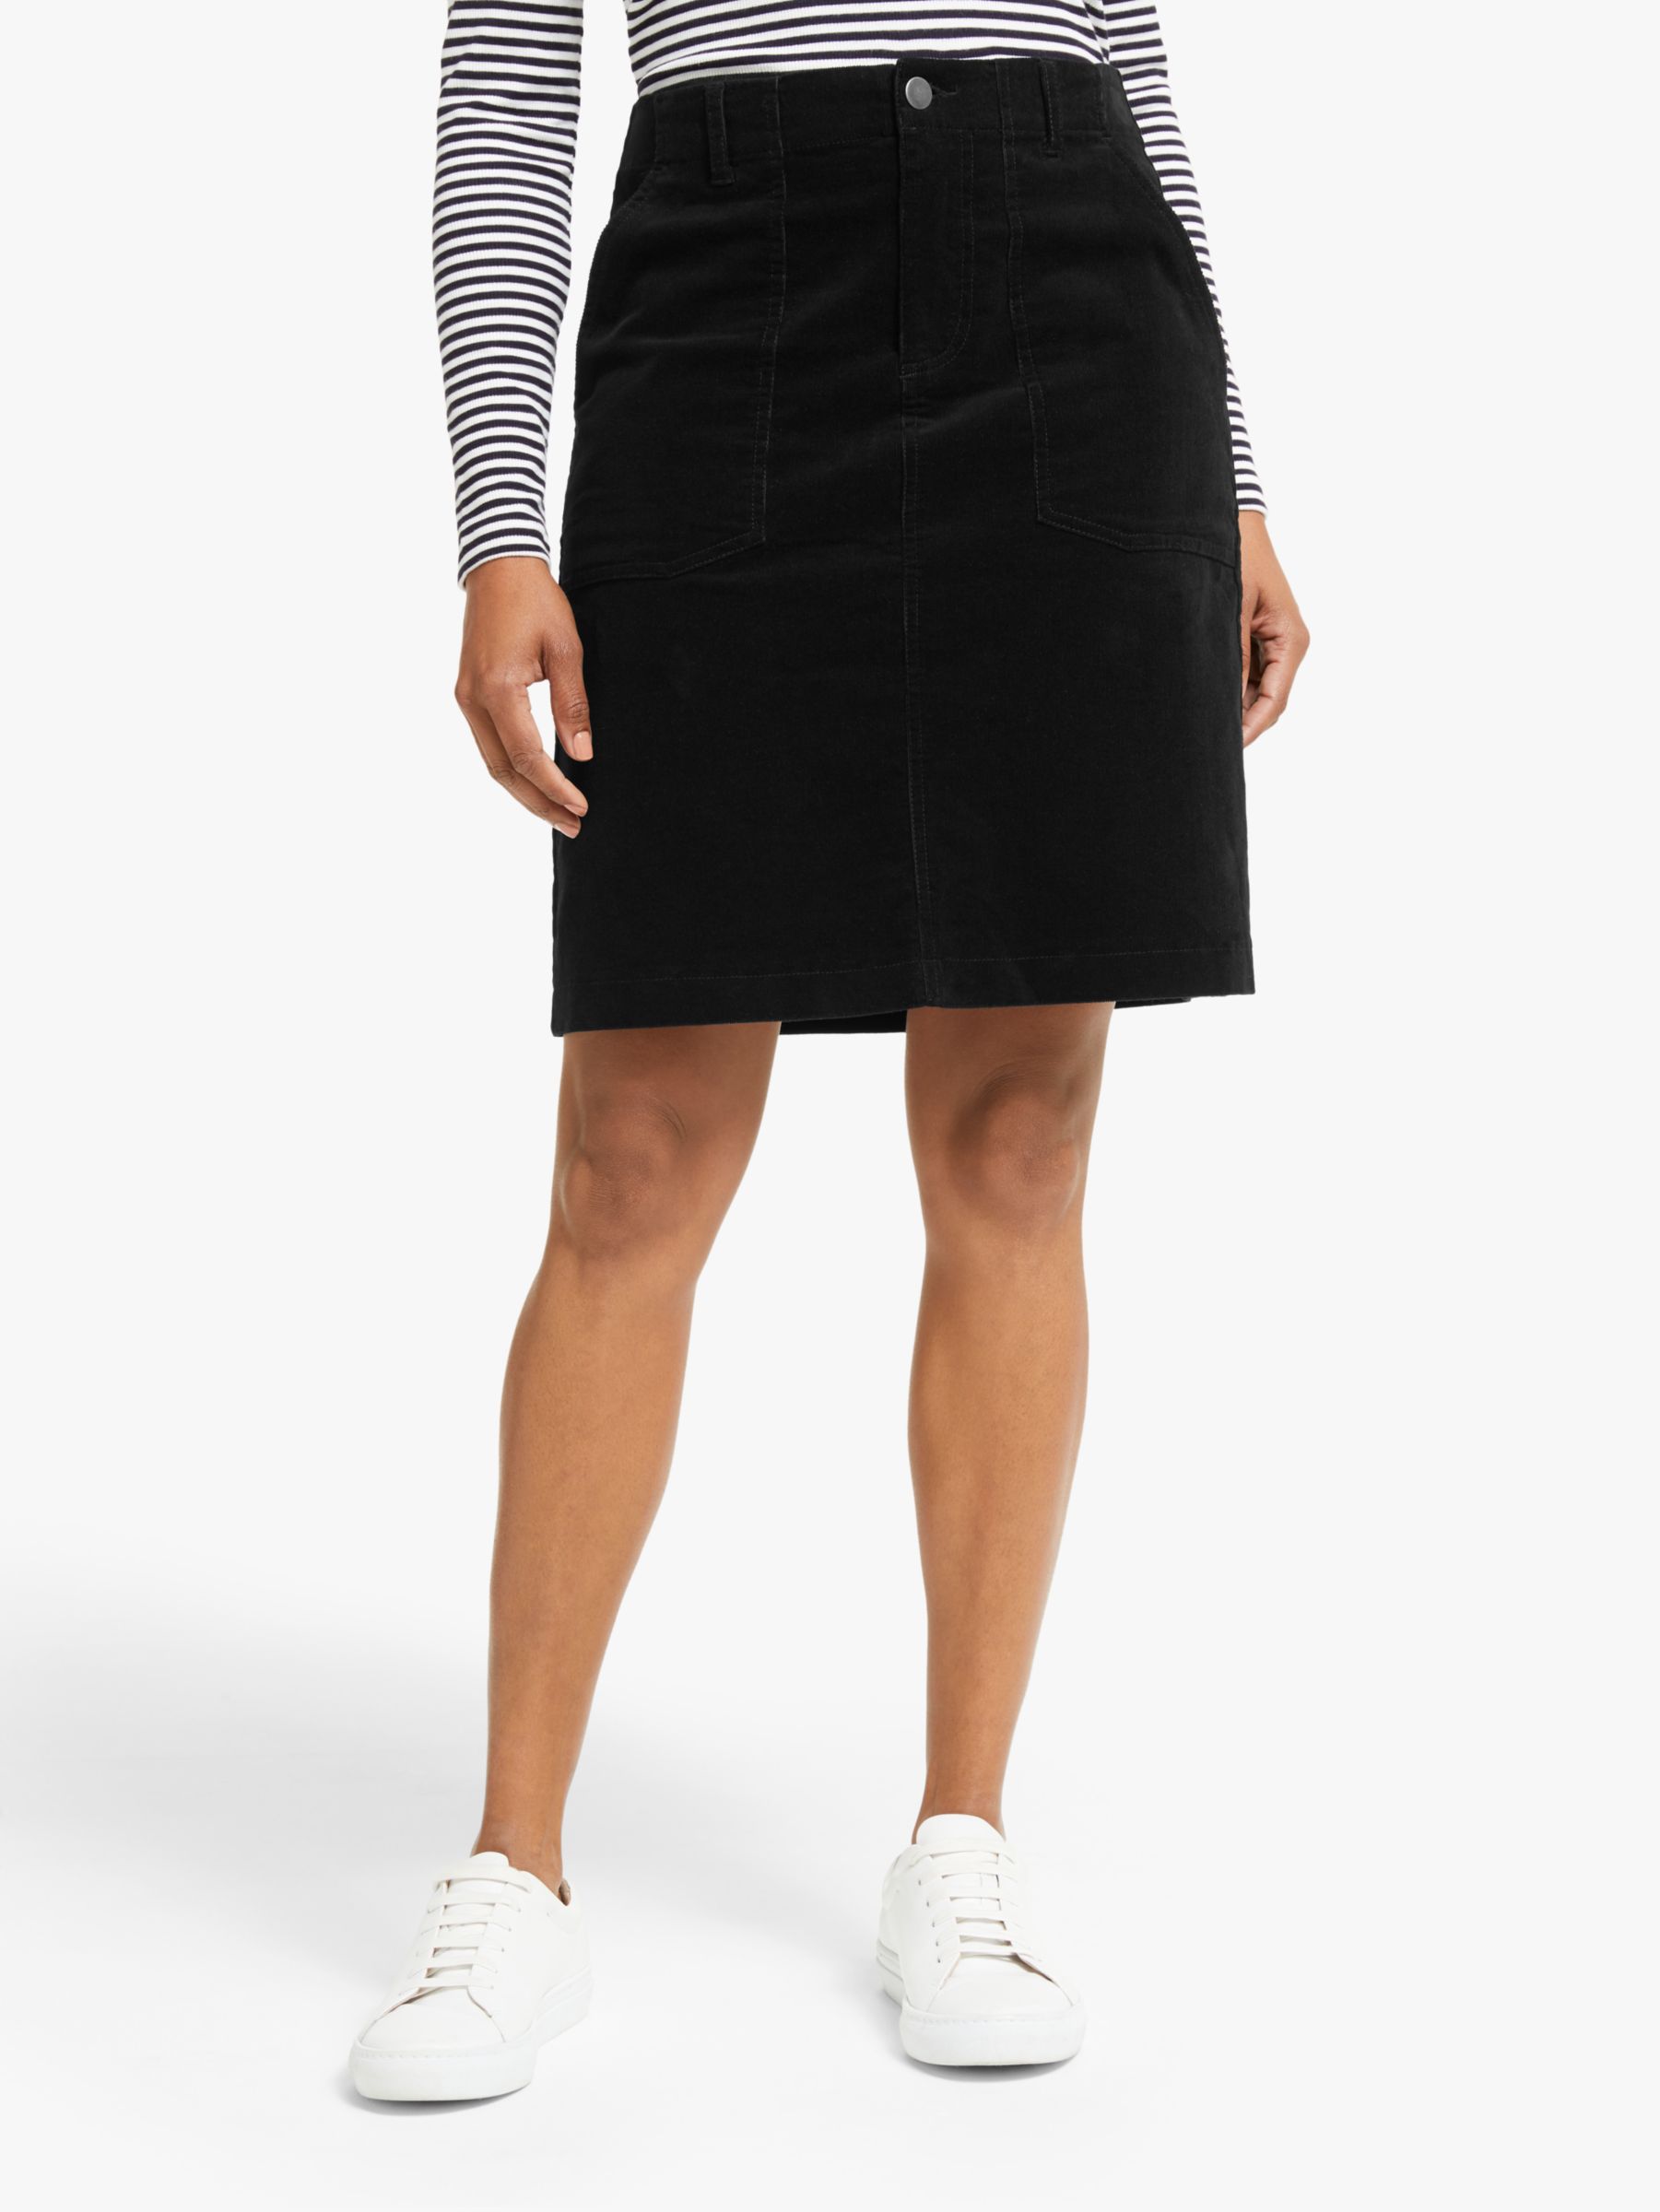 Collection WEEKEND by John Lewis Cord A-Line Utility Pocket Skirt